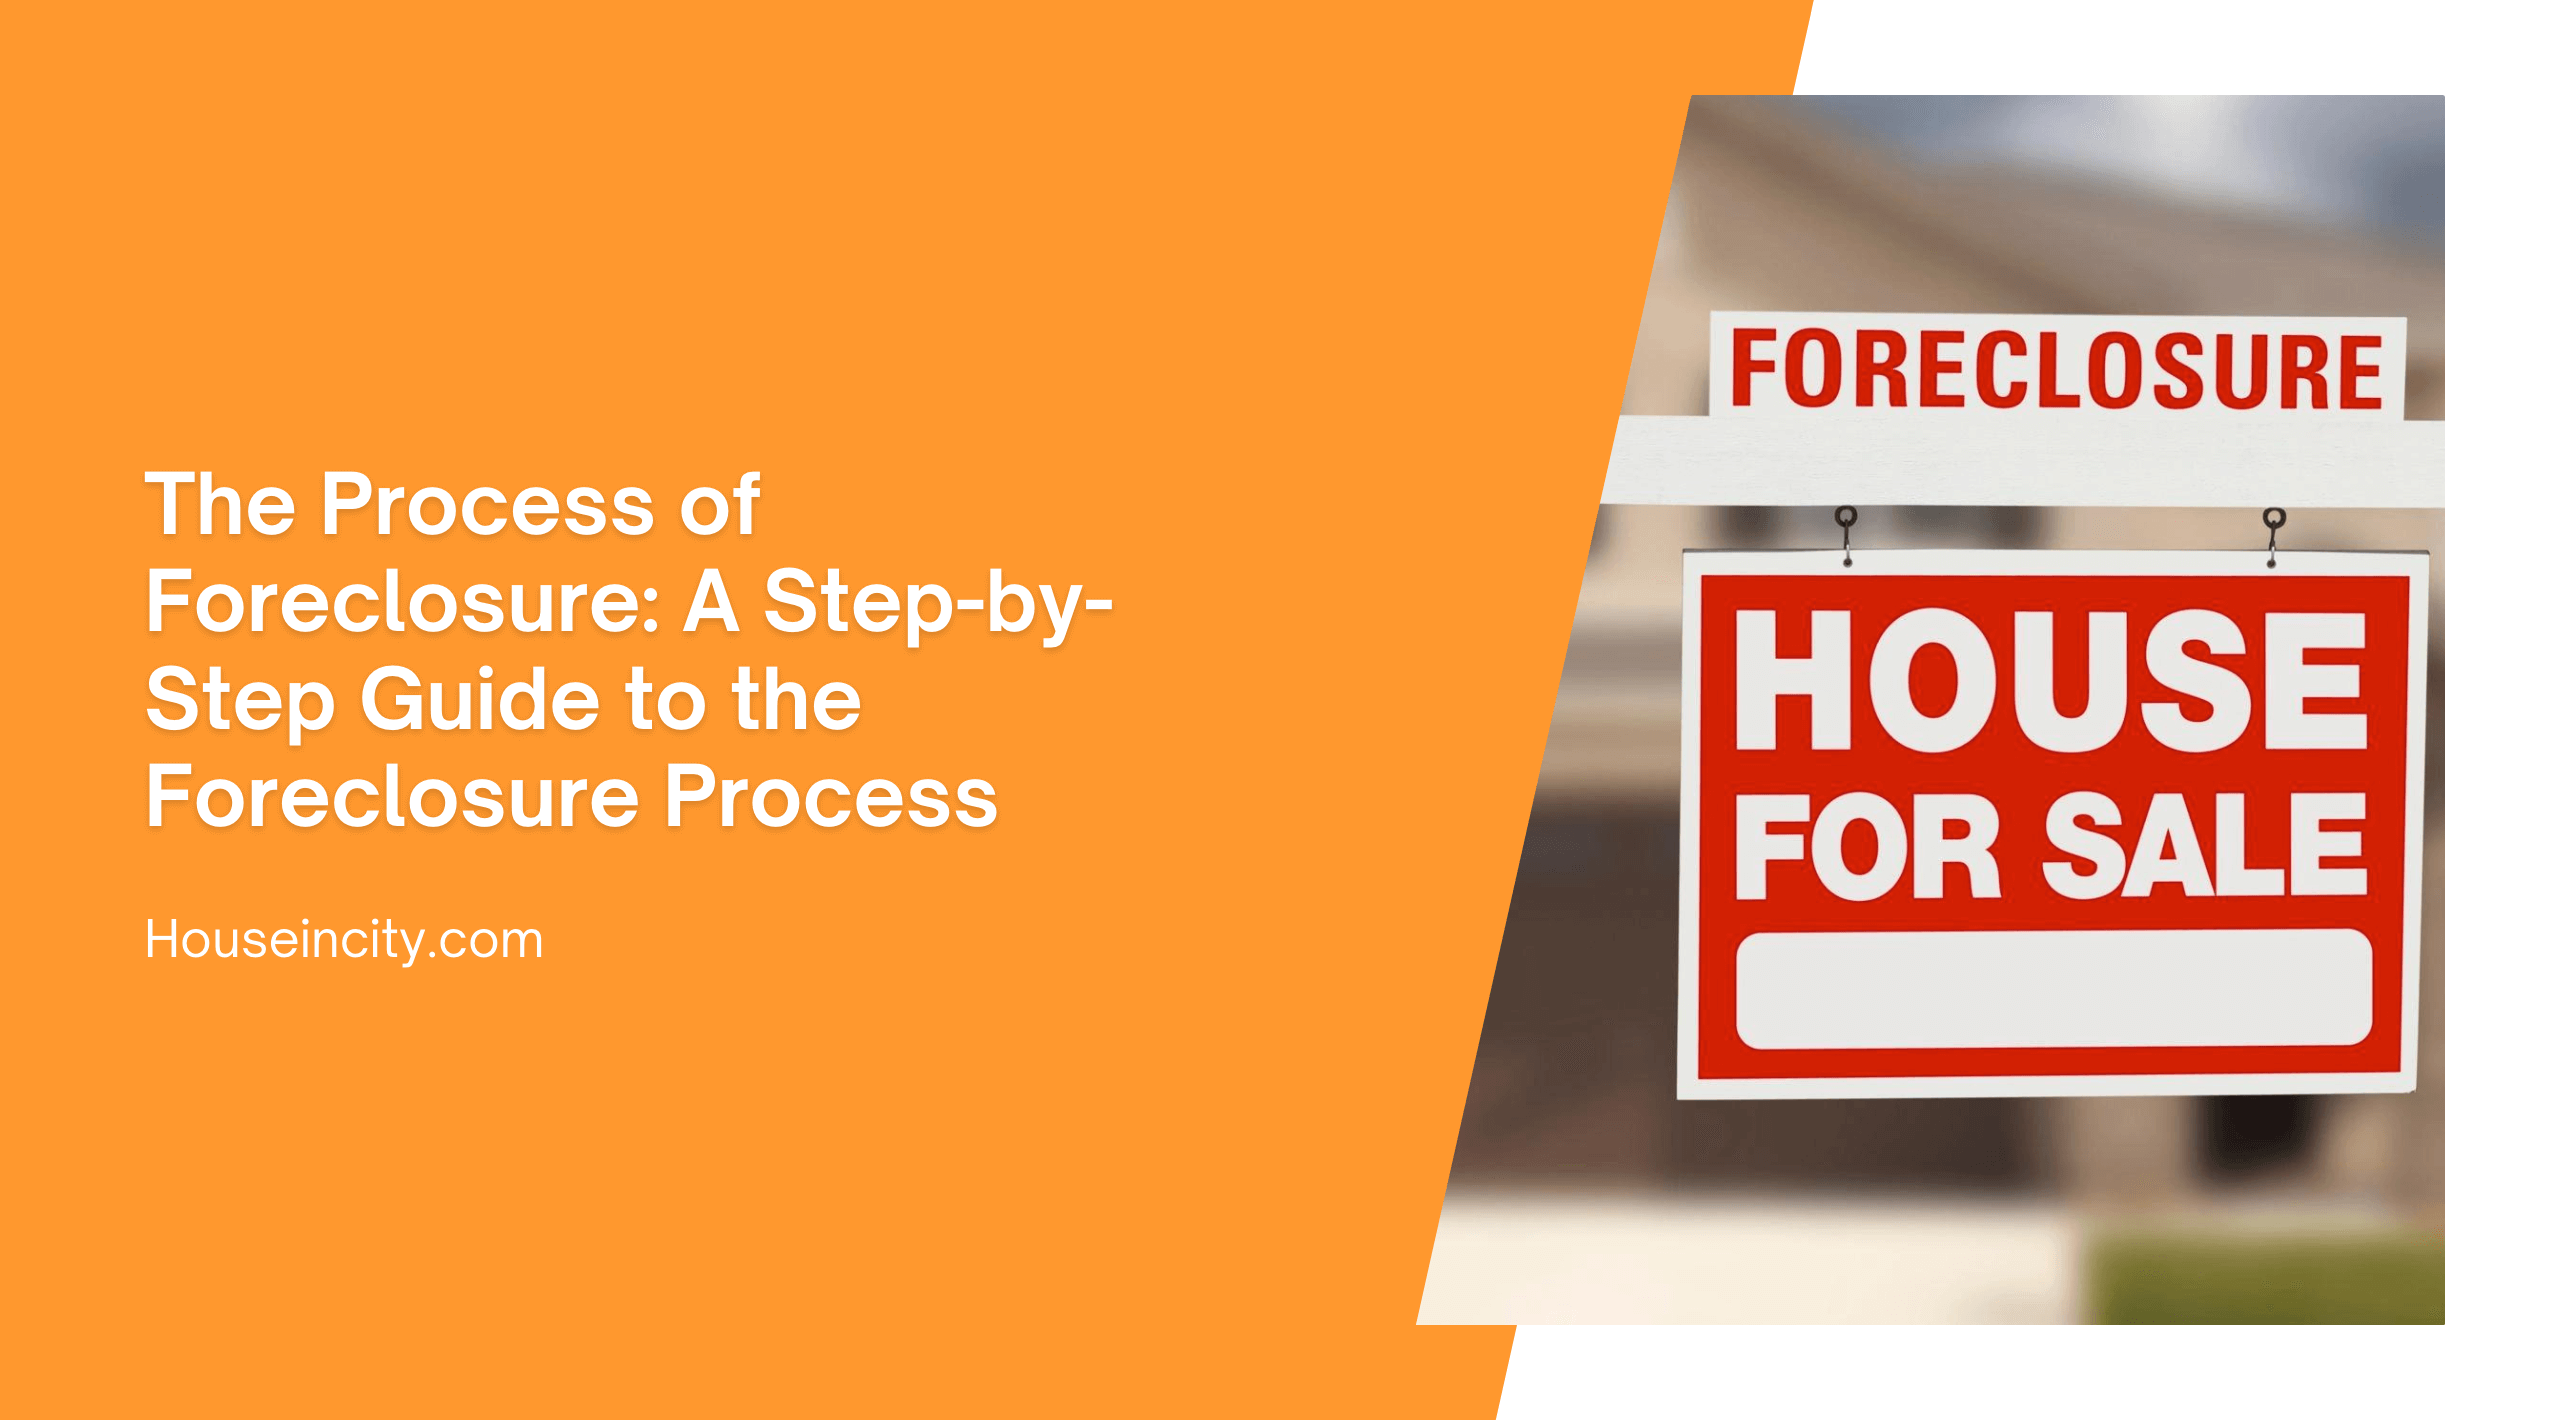 The Process of Foreclosure: A Step-by-Step Guide to the Foreclosure Process